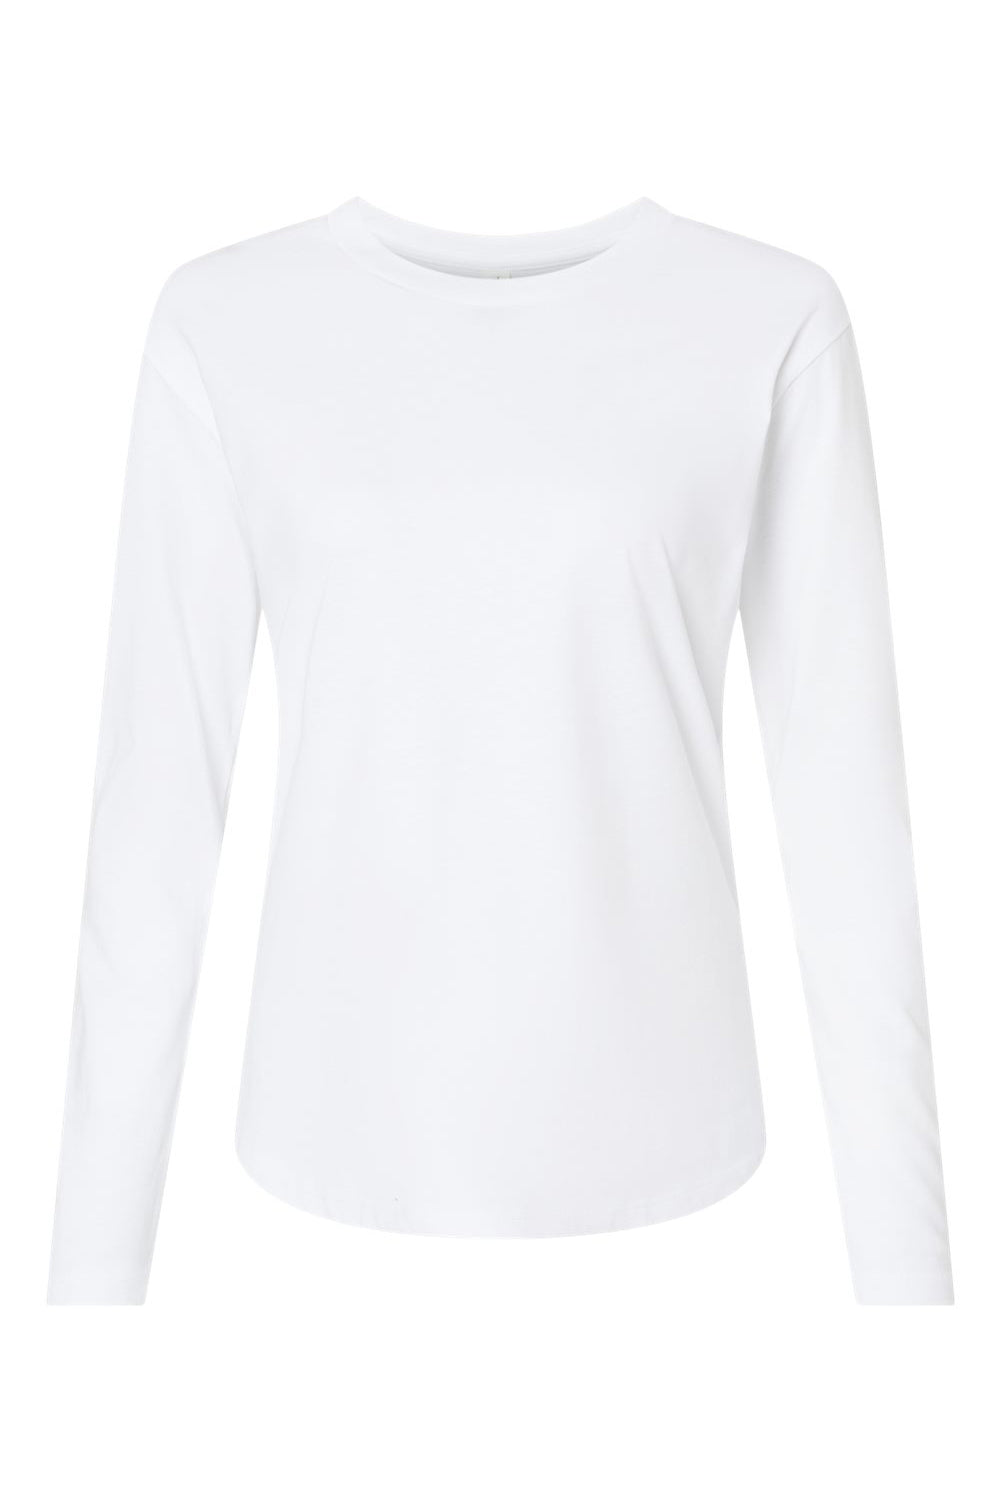 Next Level 3911 Womens Relaxed Long Sleeve Crewneck T-Shirt White Flat Front